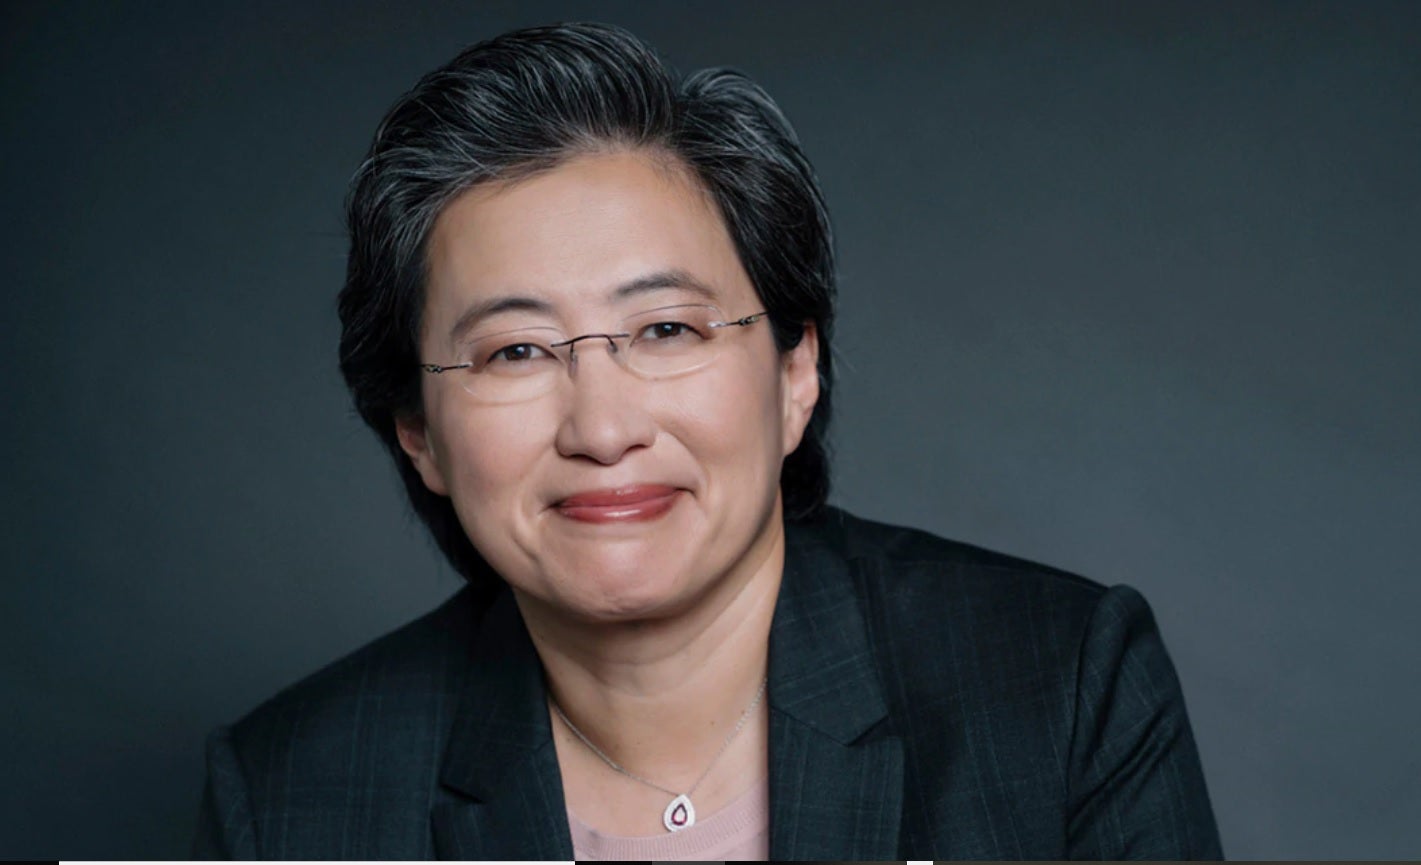 AMD Hikes Full Year Guidance - Admits 7nm Capacity is Tight